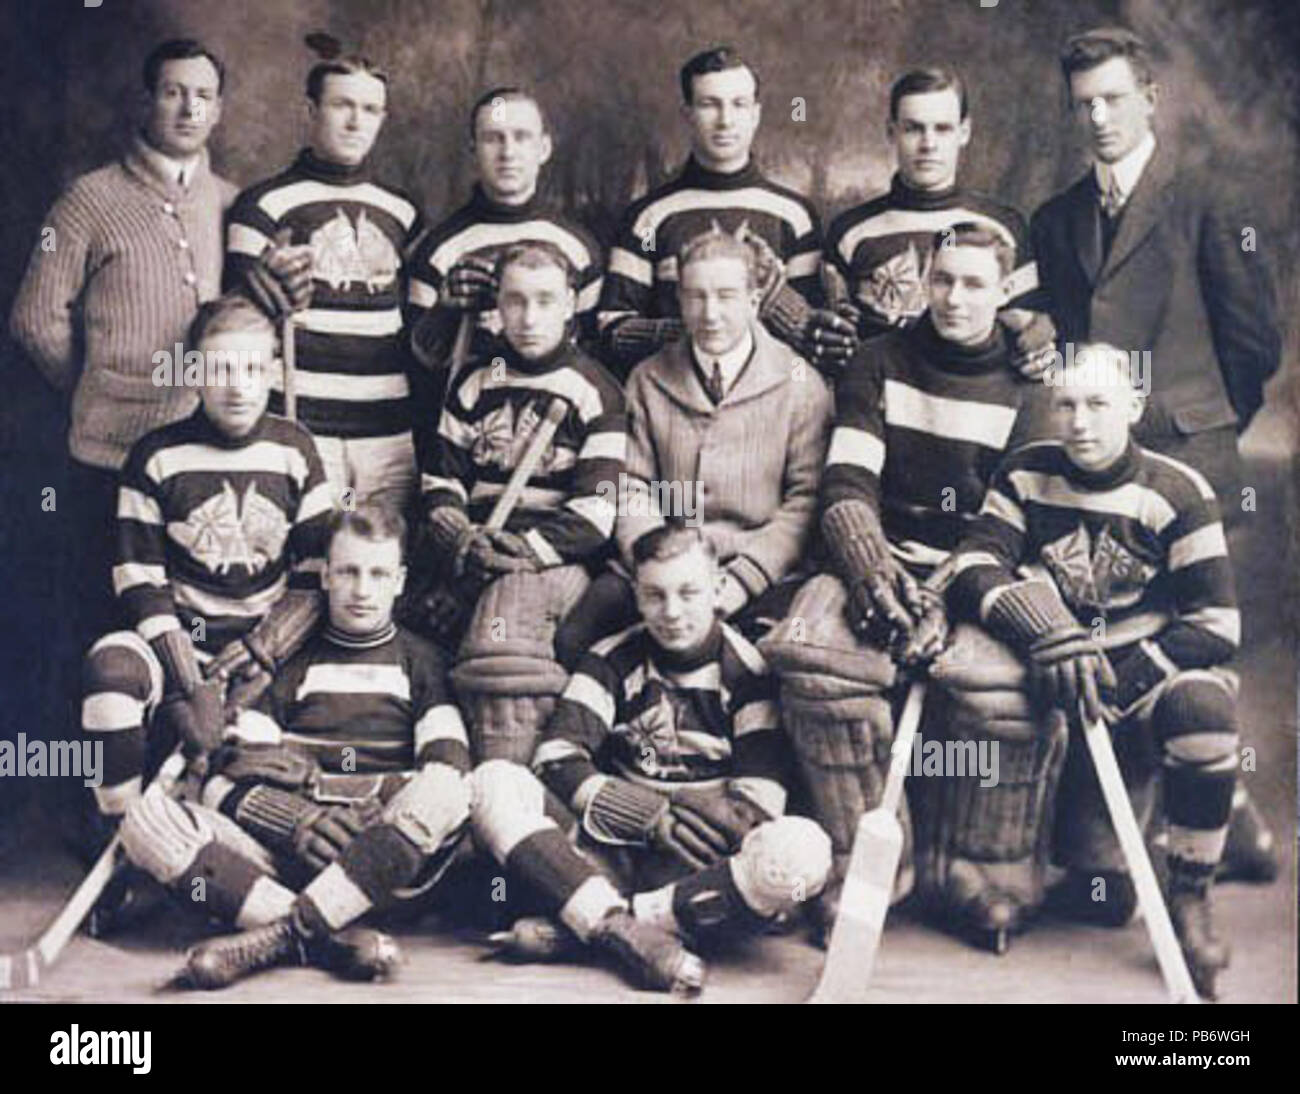 . Portrait of the Ottawa Senators. Ottawa Senators, 1914-1915 by George T. Wadds. Back Row: Cosy Dolan (trainer), Jack Darragh, Hamby Shore, Art Ross, Horace Merrill, Frank Shaughnessy (manager) Middle Row: Angus Duford, Sammy Hebert (goalie), Alf Smith (coach), Clint Benedict, Leth Graham Front Row (seated): Edie Gerard (left), Punch Broadbent . between 1914 and 1915 1144 OttawaSenators1914-15 Stock Photo